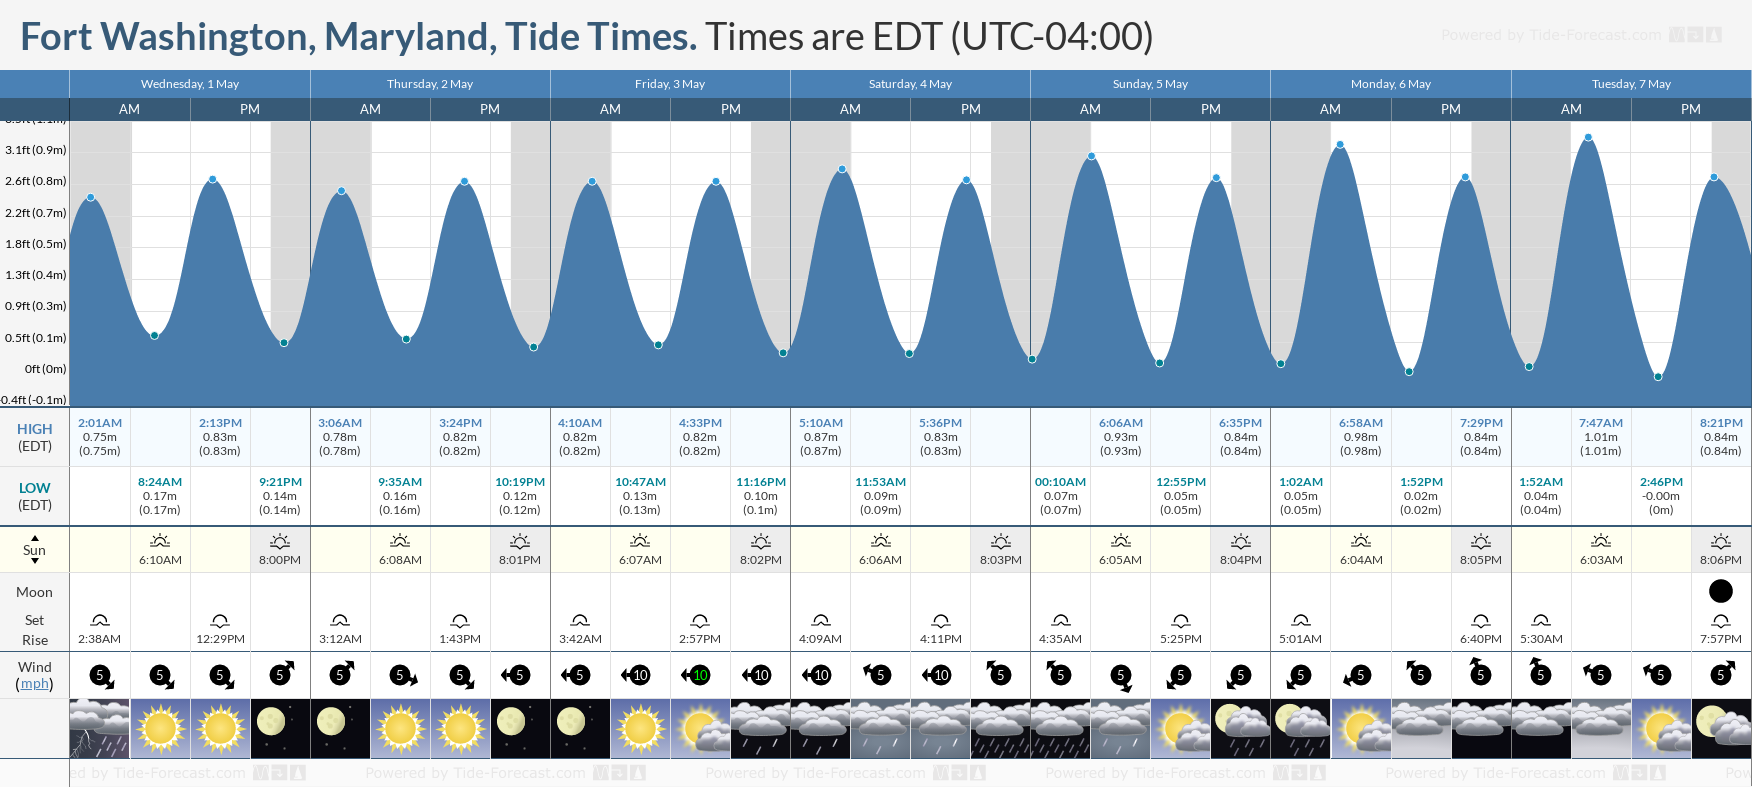 Fort Washington, Maryland Tide Chart including high and low tide times for the next 7 days